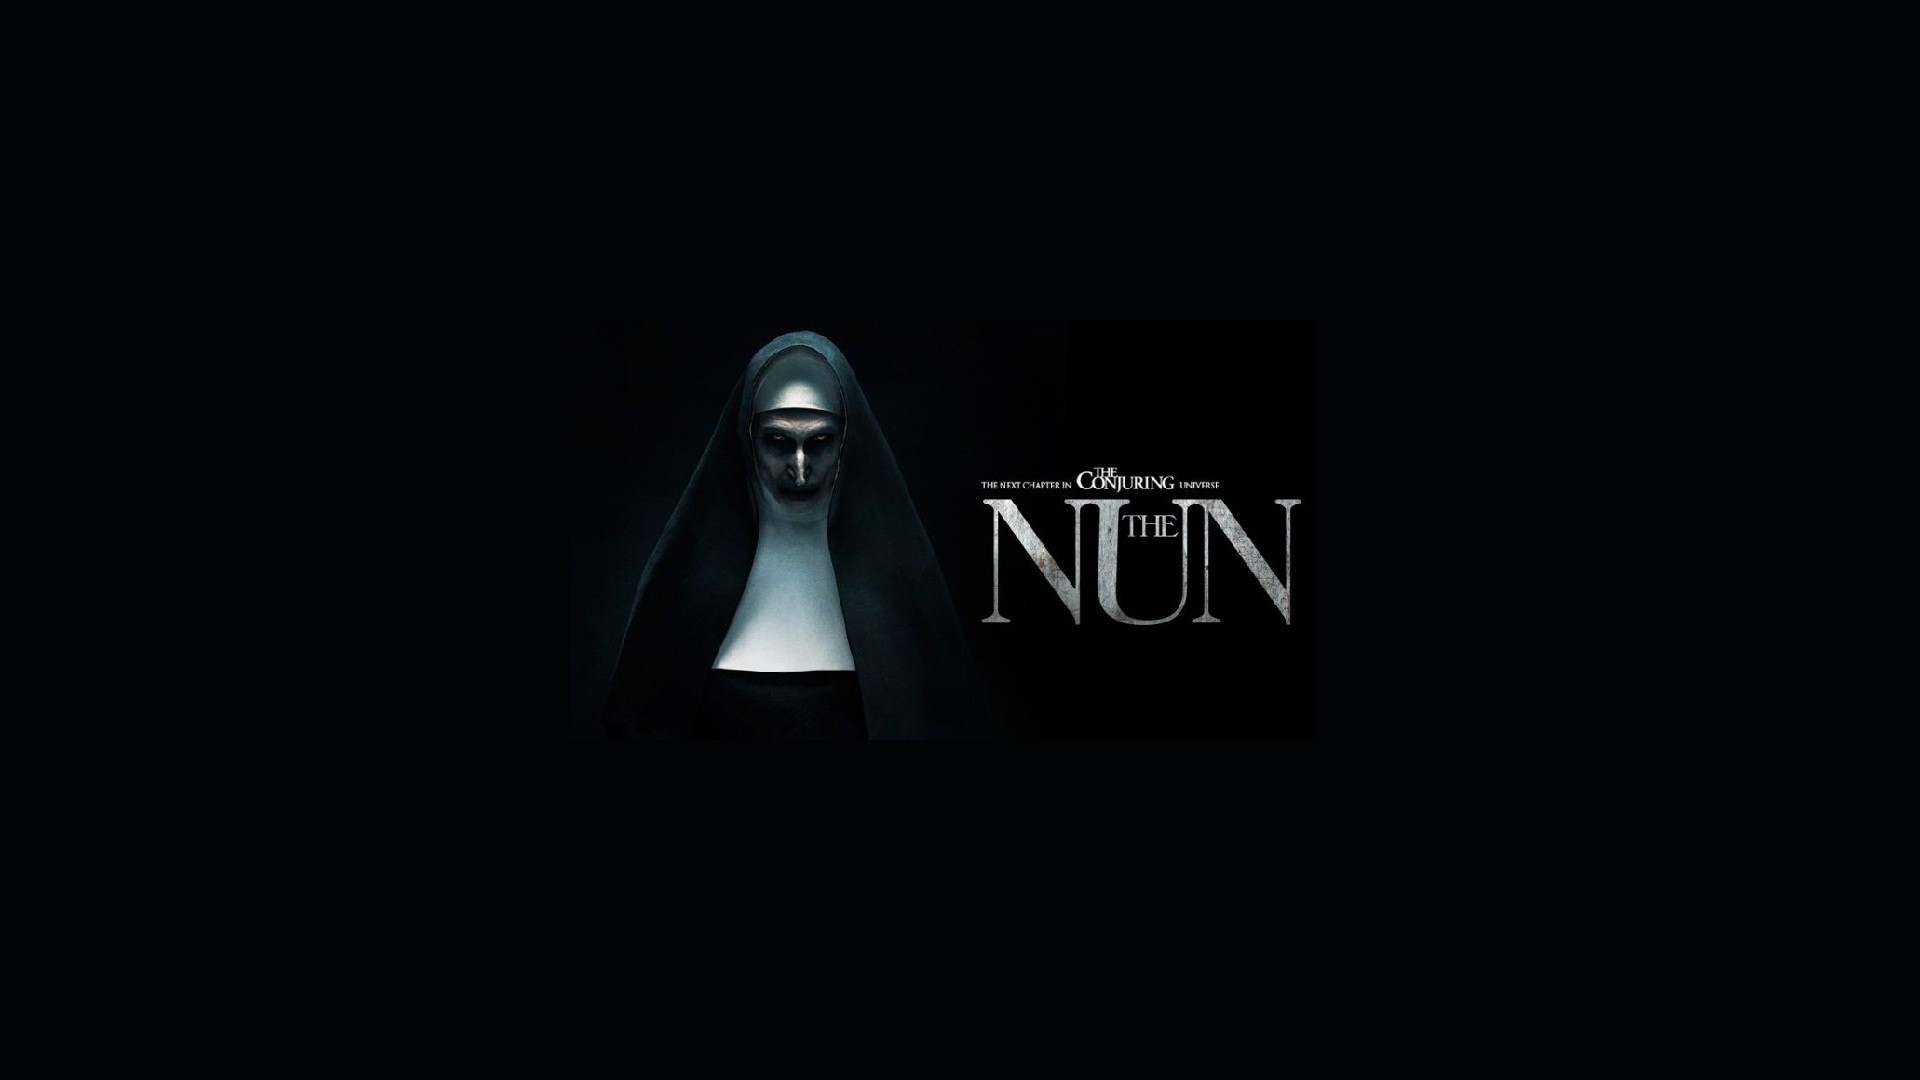 The Nun HD Wallpaper with image resolution 1920x1080 pixel. You can make this wallpaper for your Desktop Computer Backgrounds, Mac Wallpapers, Android Lock screen or iPhone Screensavers